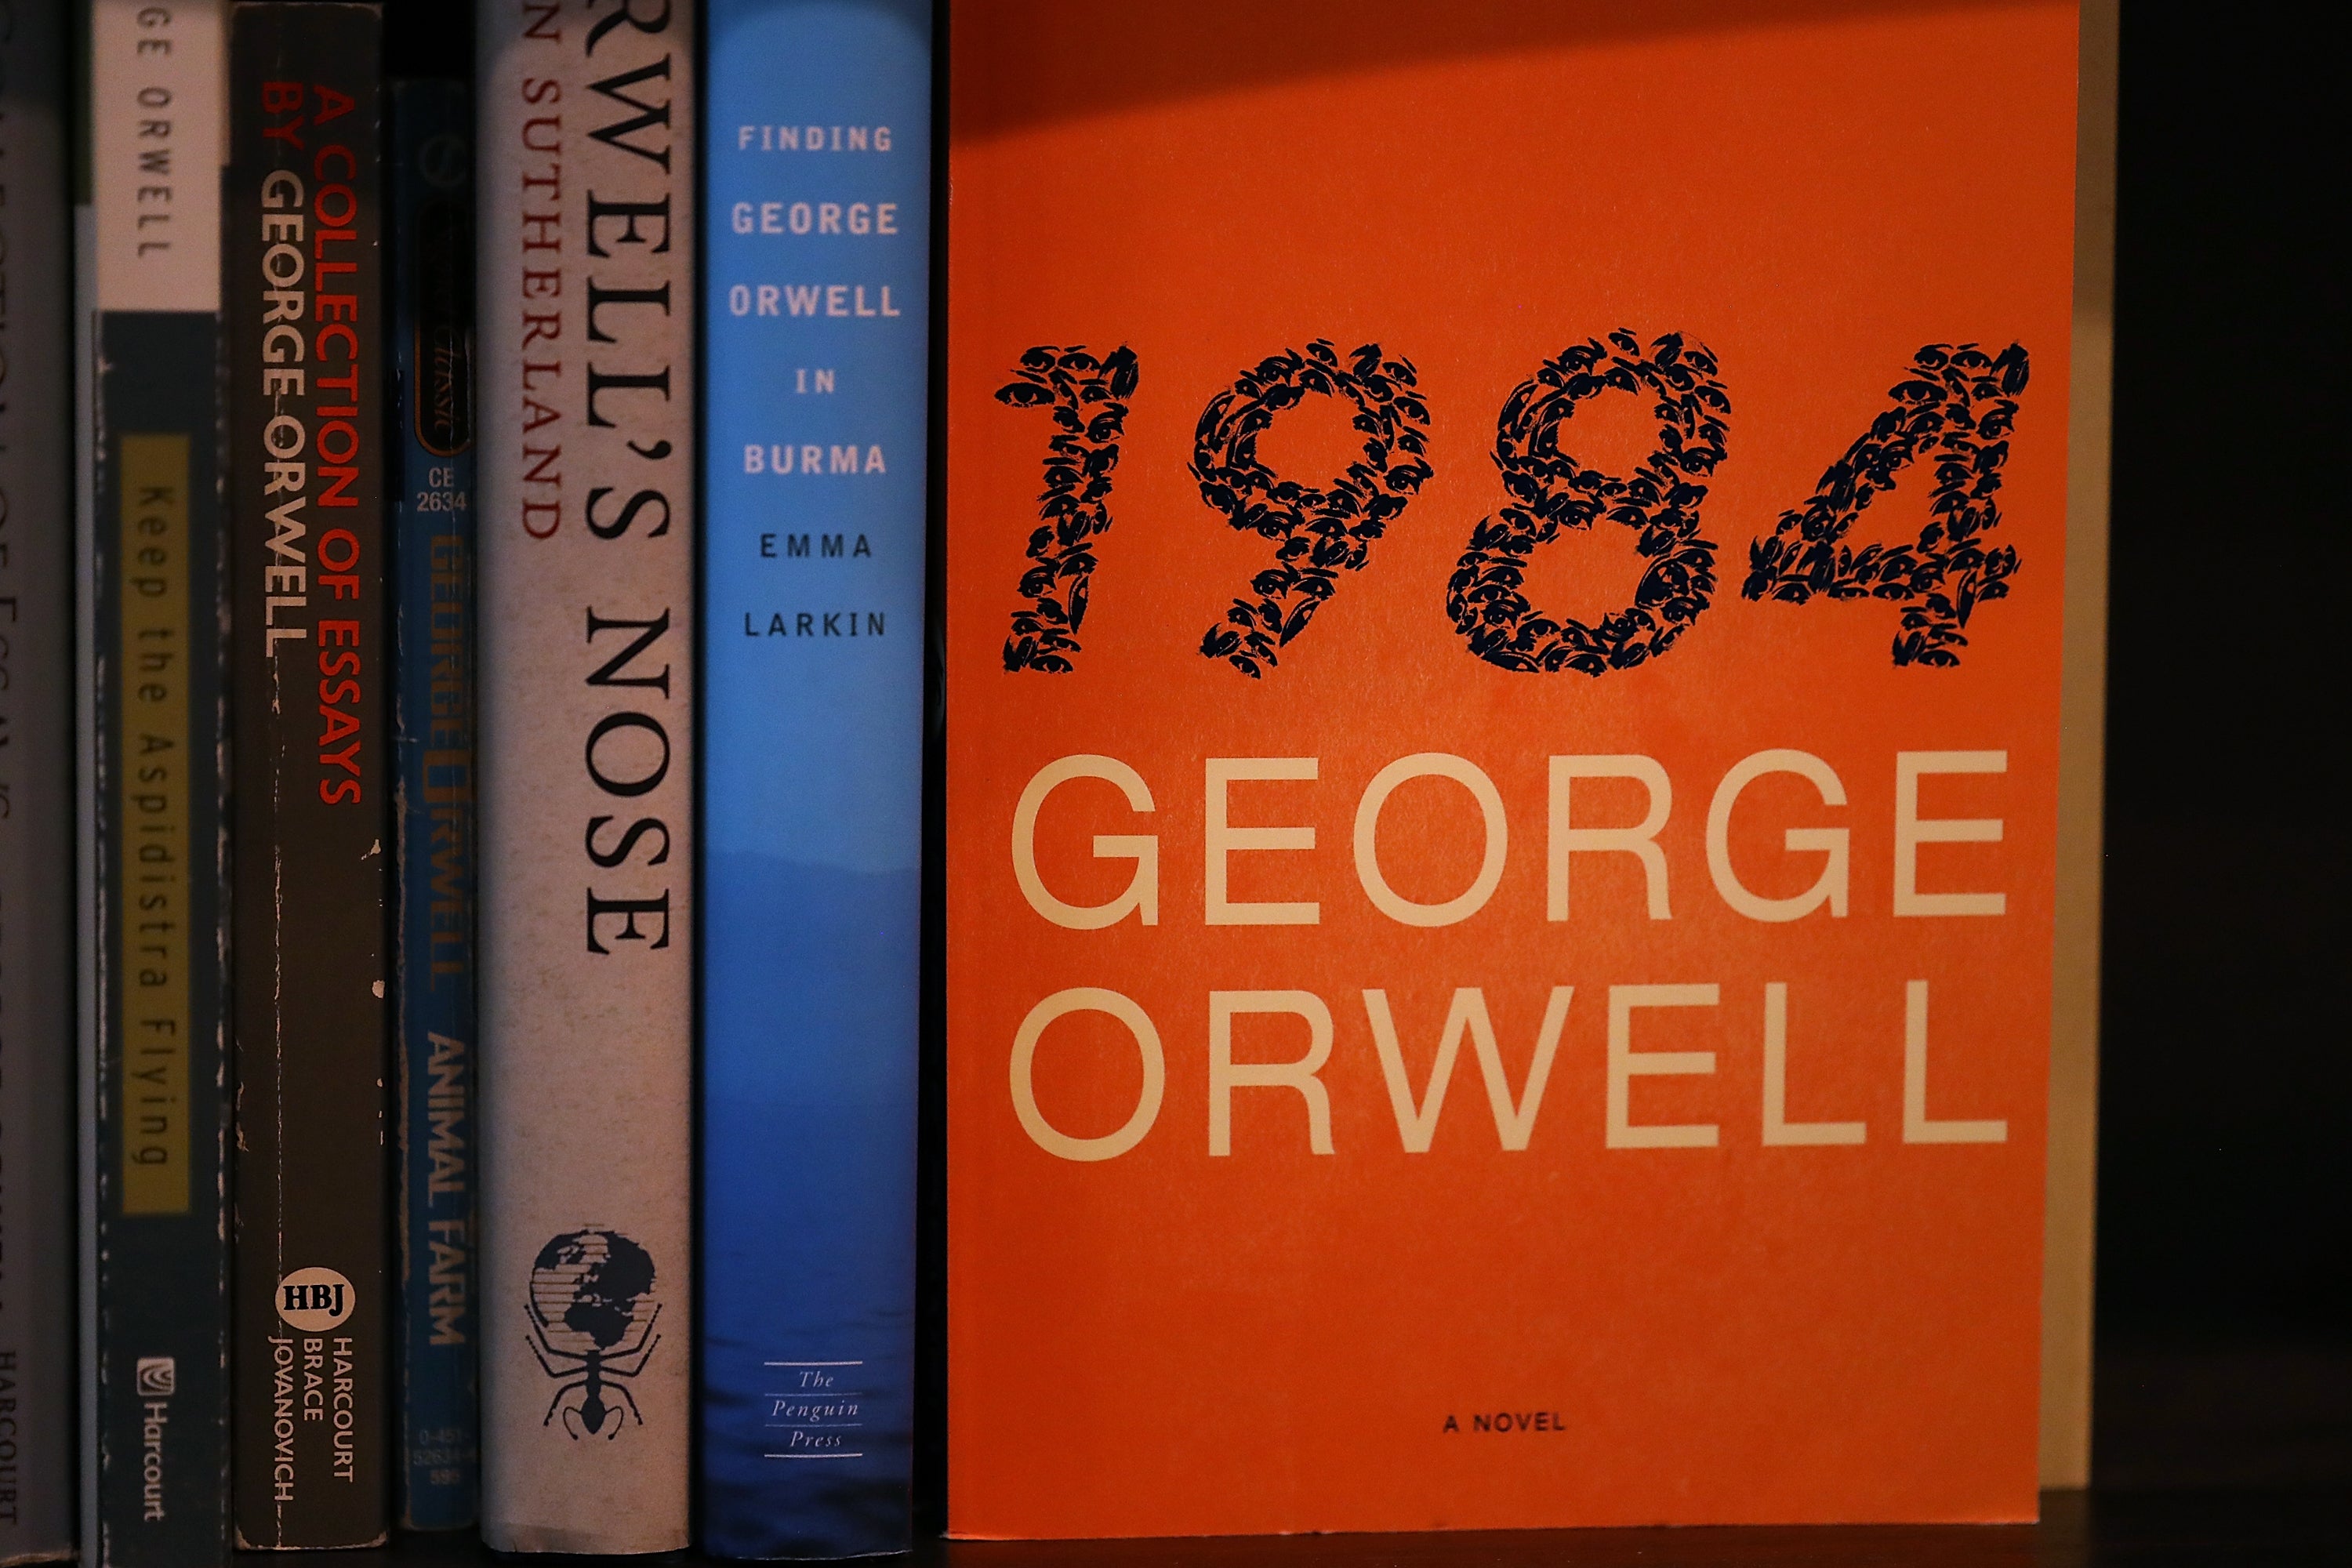 Anna Funder and Sandra Newman will discuss Orwell’s legacy